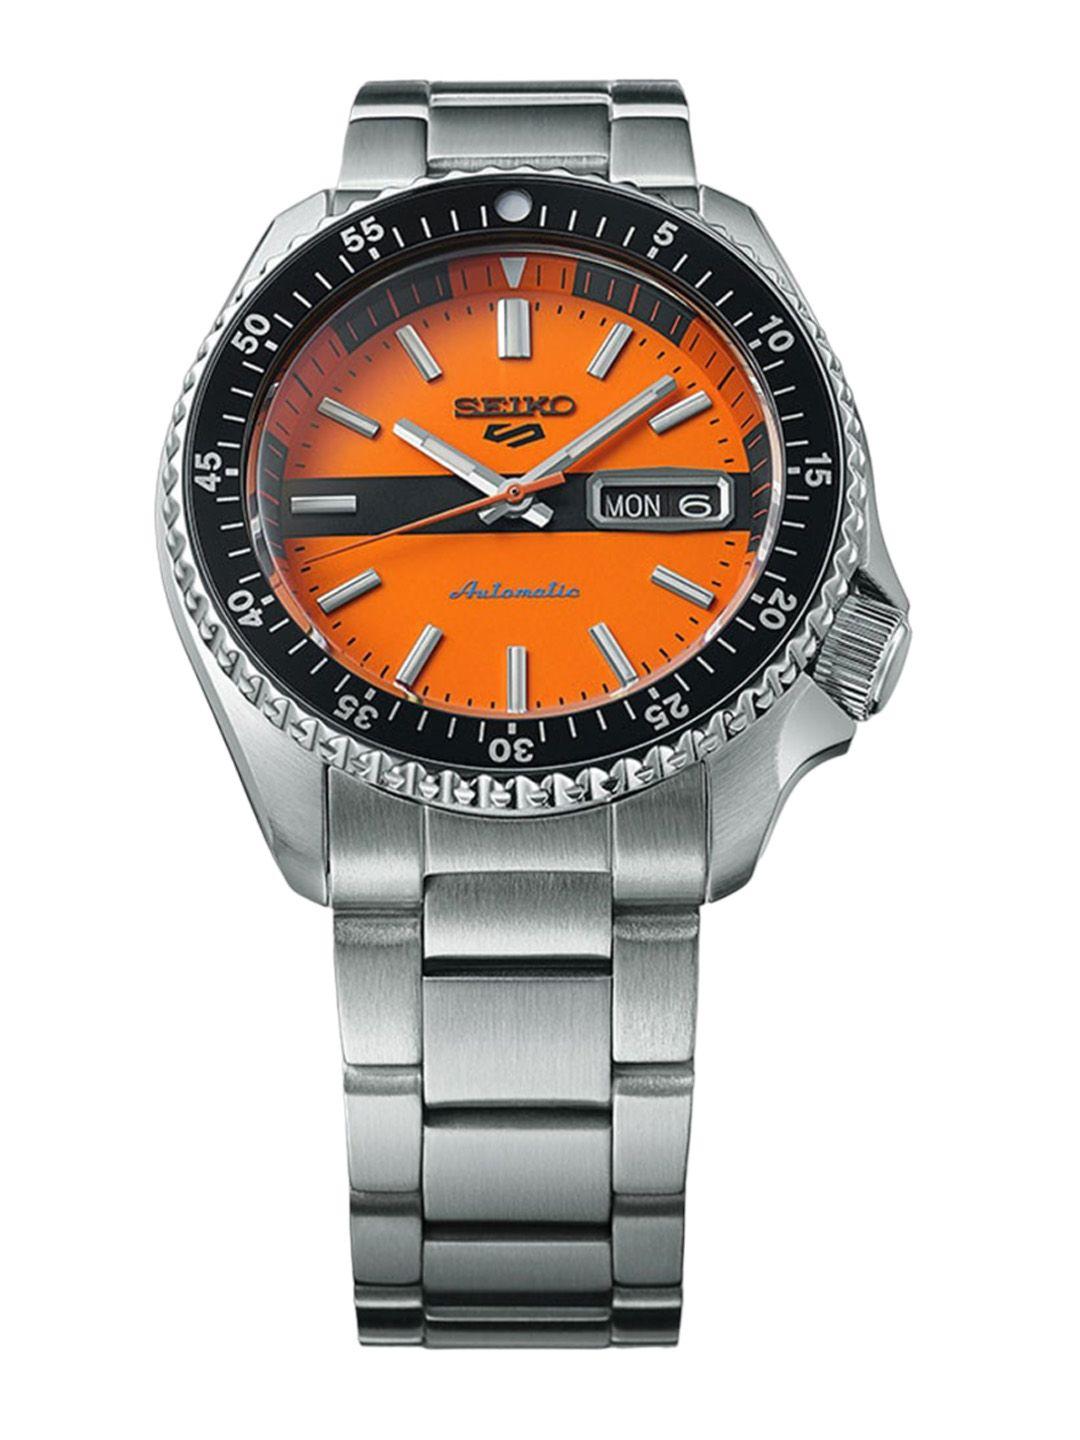 seiko-men-dial-&-stainless-steel-bracelet-style-straps-analogue-automatic-motion-powered-watch-srpk11k1